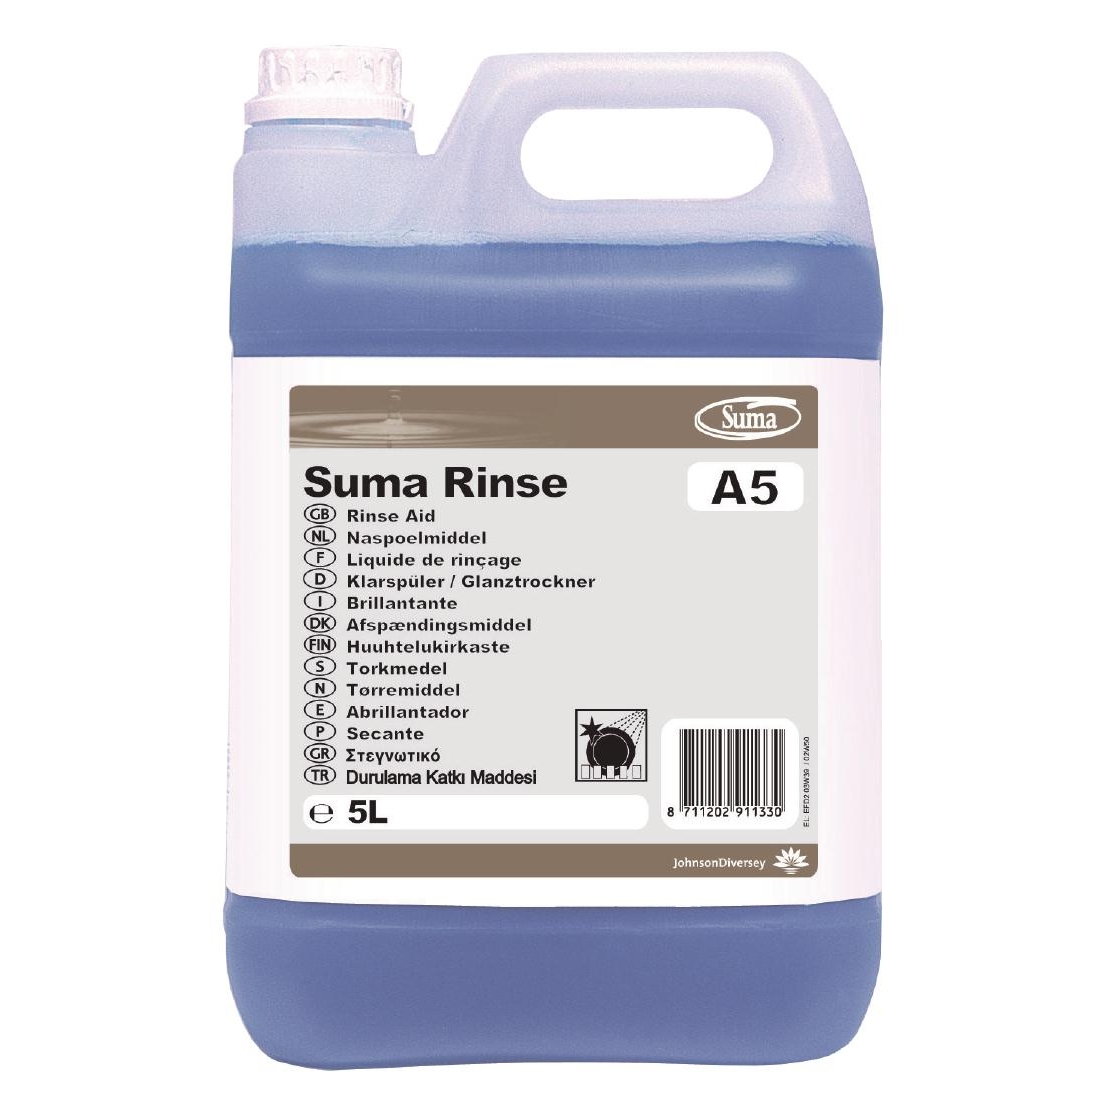 Suma A5 Rinse Aid 5 Litre (Pack of 2)